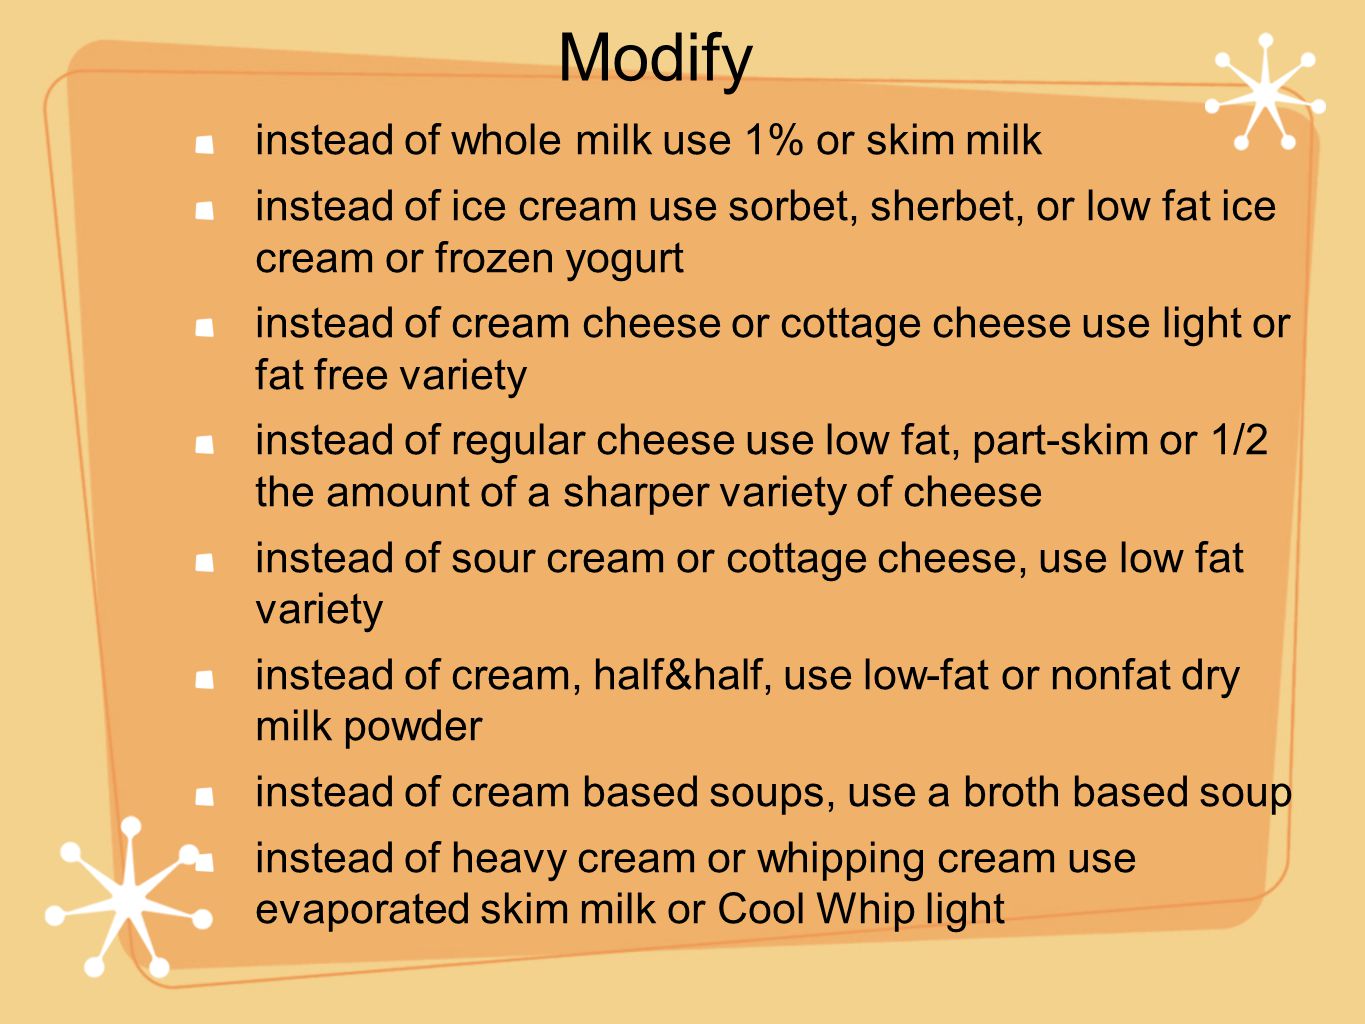 instead of whole milk use 1% or skim milk instead of ice cream use sorbet, sherbet, or low fat ice cream or frozen yogurt instead of cream cheese or cottage cheese use light or fat free variety instead of regular cheese use low fat, part-skim or 1/2 the amount of a sharper variety of cheese instead of sour cream or cottage cheese, use low fat variety instead of cream, half&half, use low-fat or nonfat dry milk powder instead of cream based soups, use a broth based soup instead of heavy cream or whipping cream use evaporated skim milk or Cool Whip light Modify